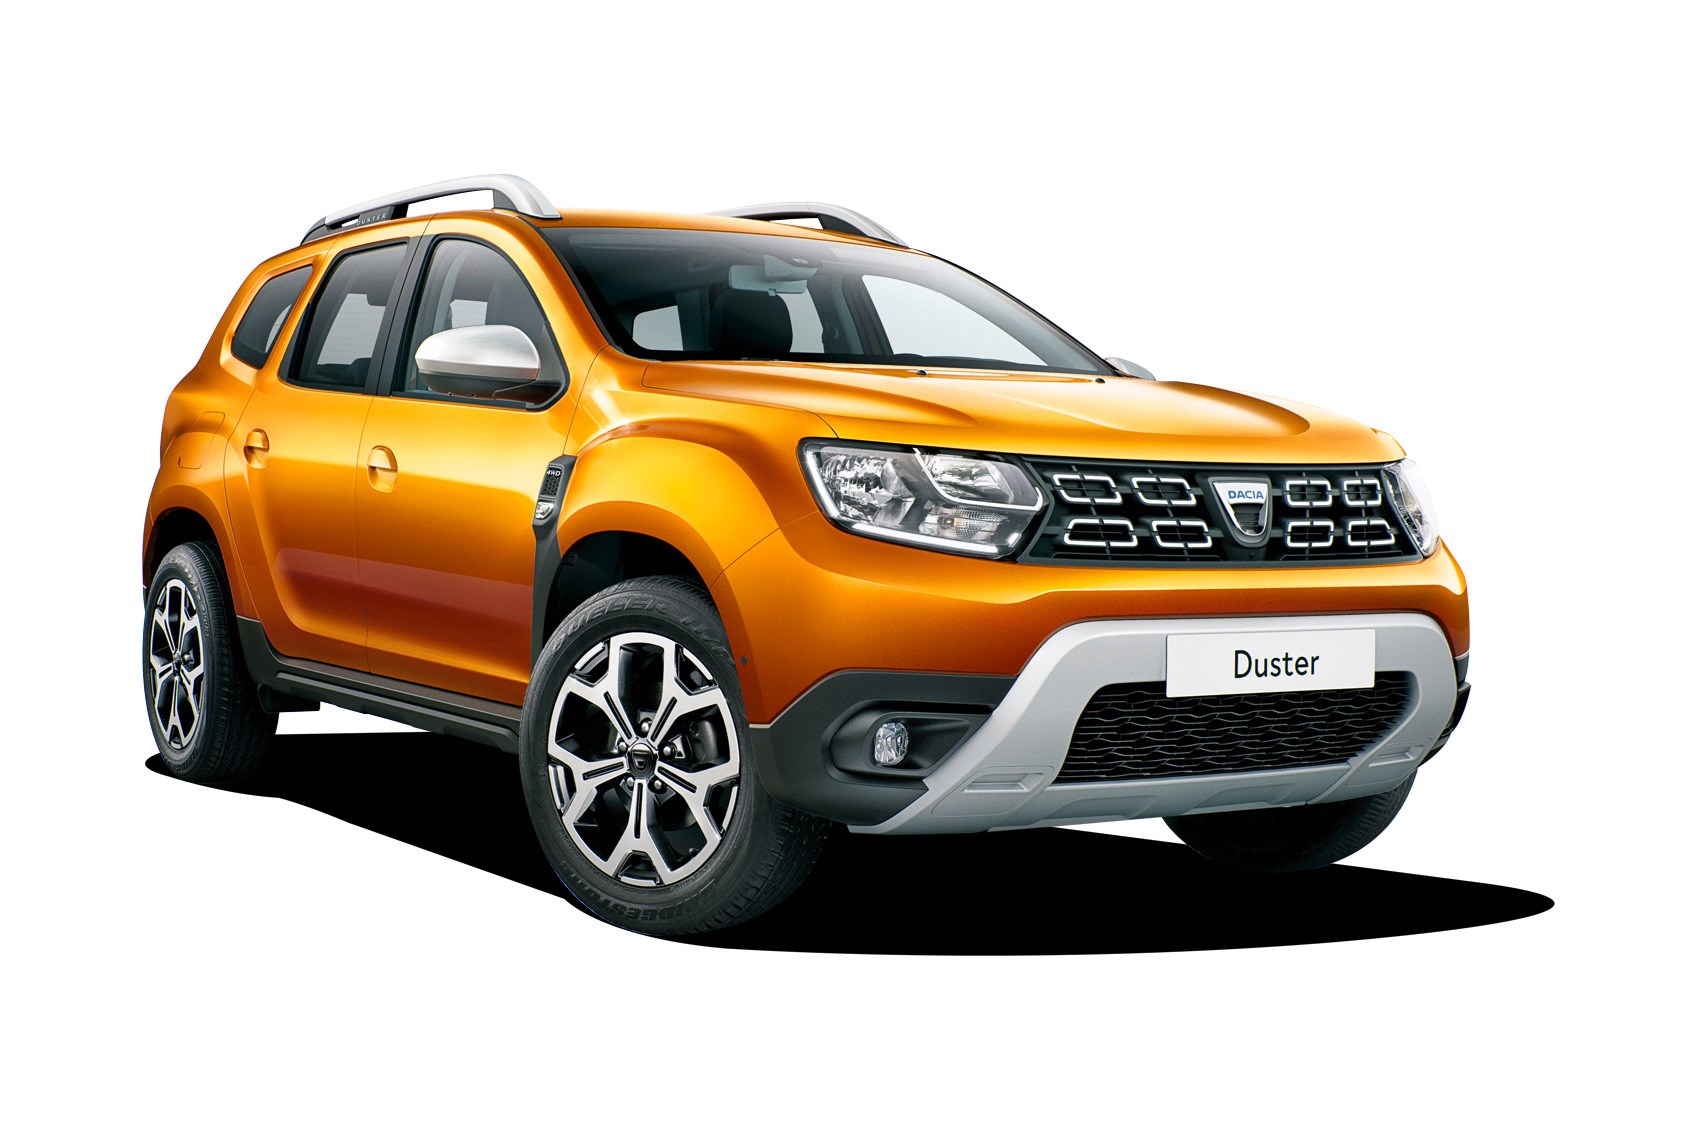 New 2018 Dacia Duster revealed: pictures, specs, details